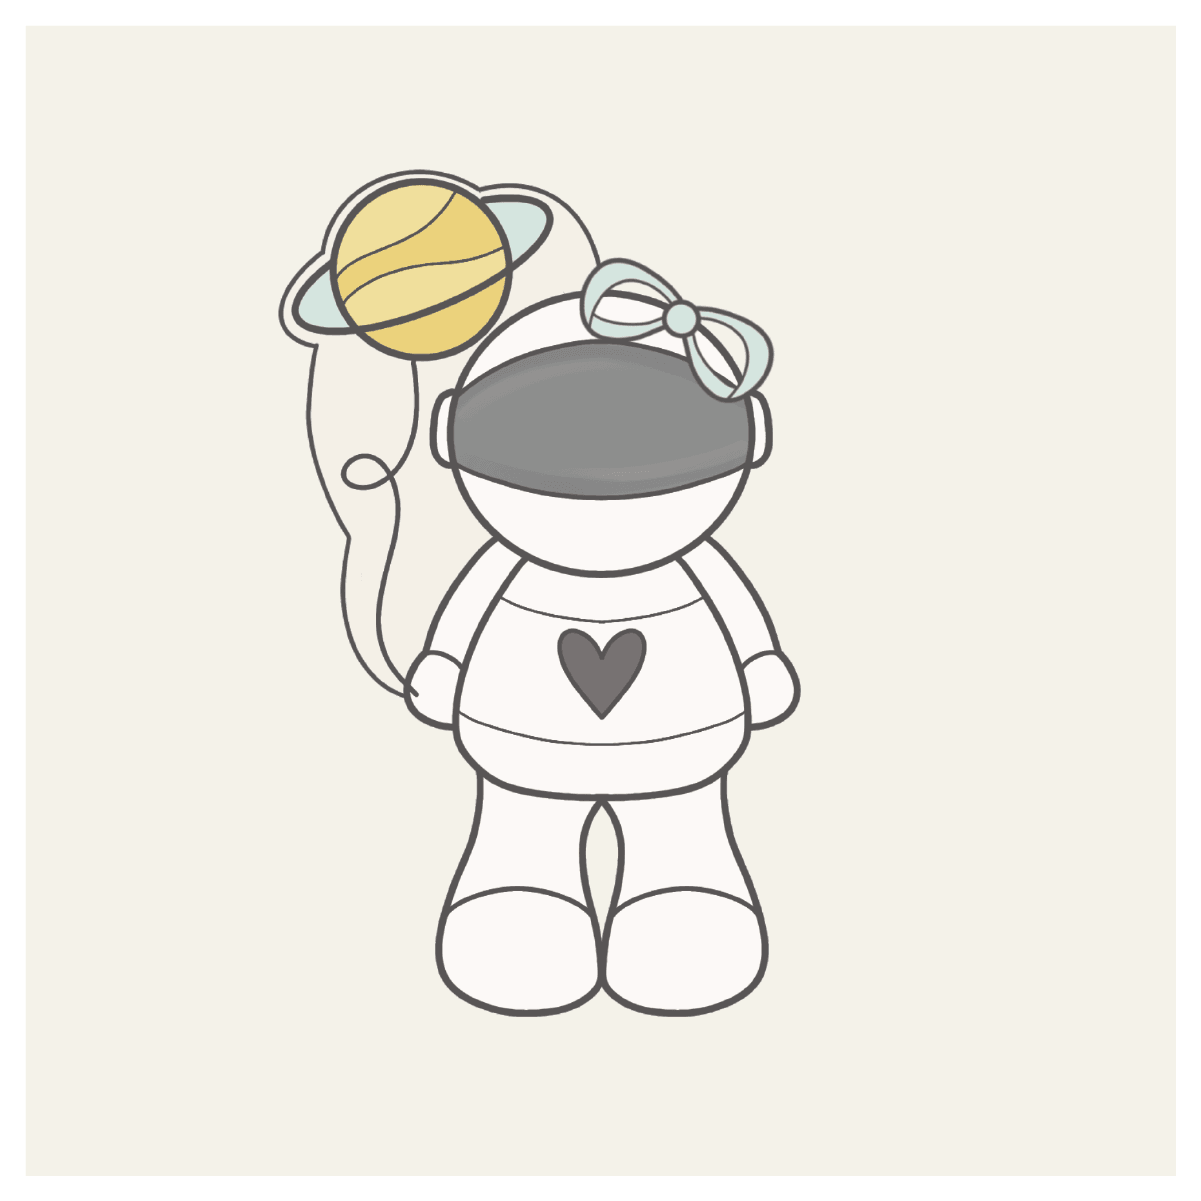 Astronaut with Bow and Balloons Cookie Cutter - Sweetleigh 